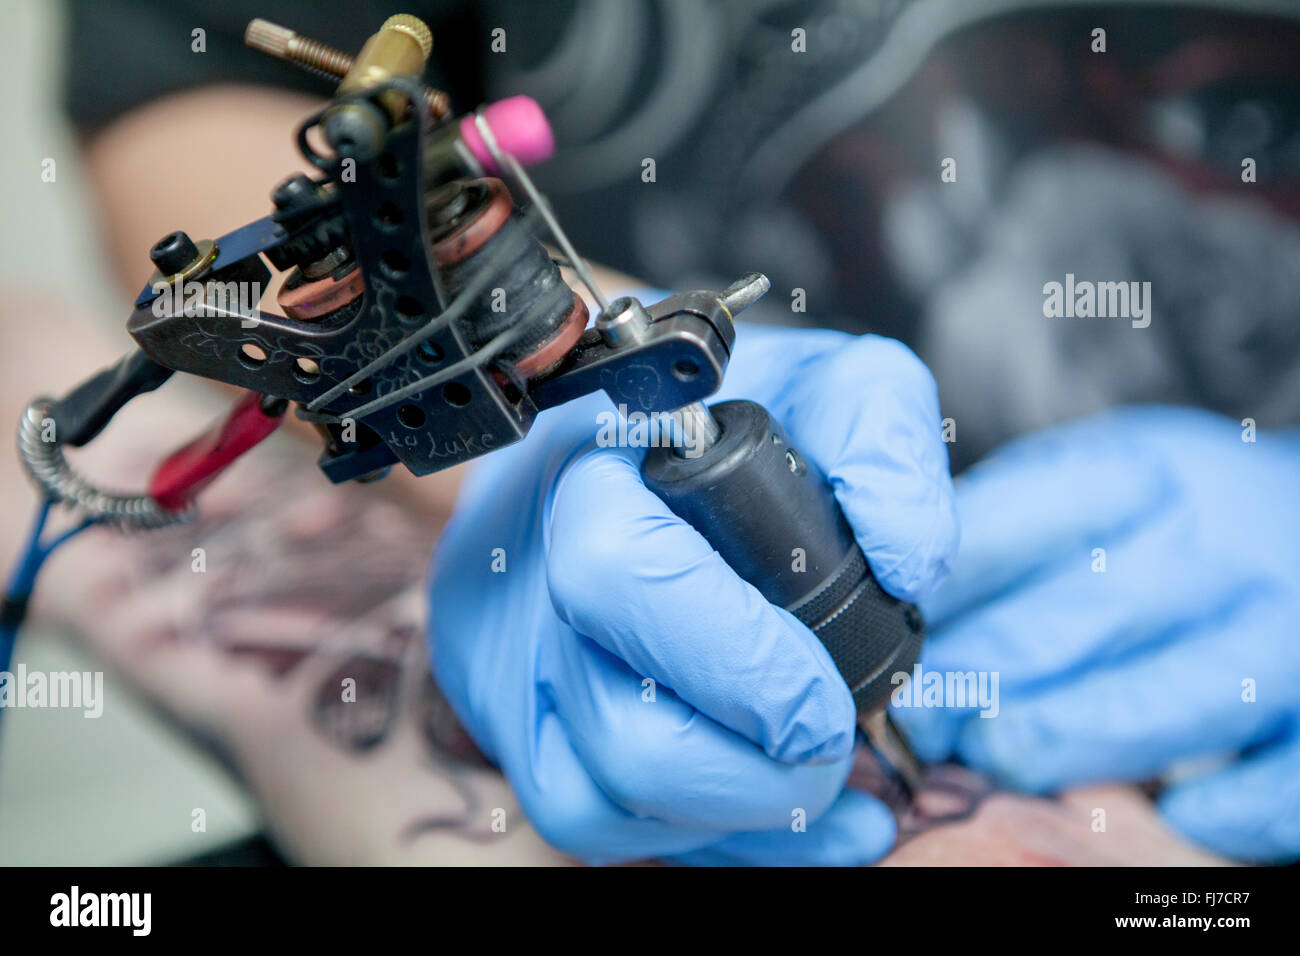 Tattoo artist wearing blue latex gloves tattoos a bio-mechanical images on clients arm Stock Photo